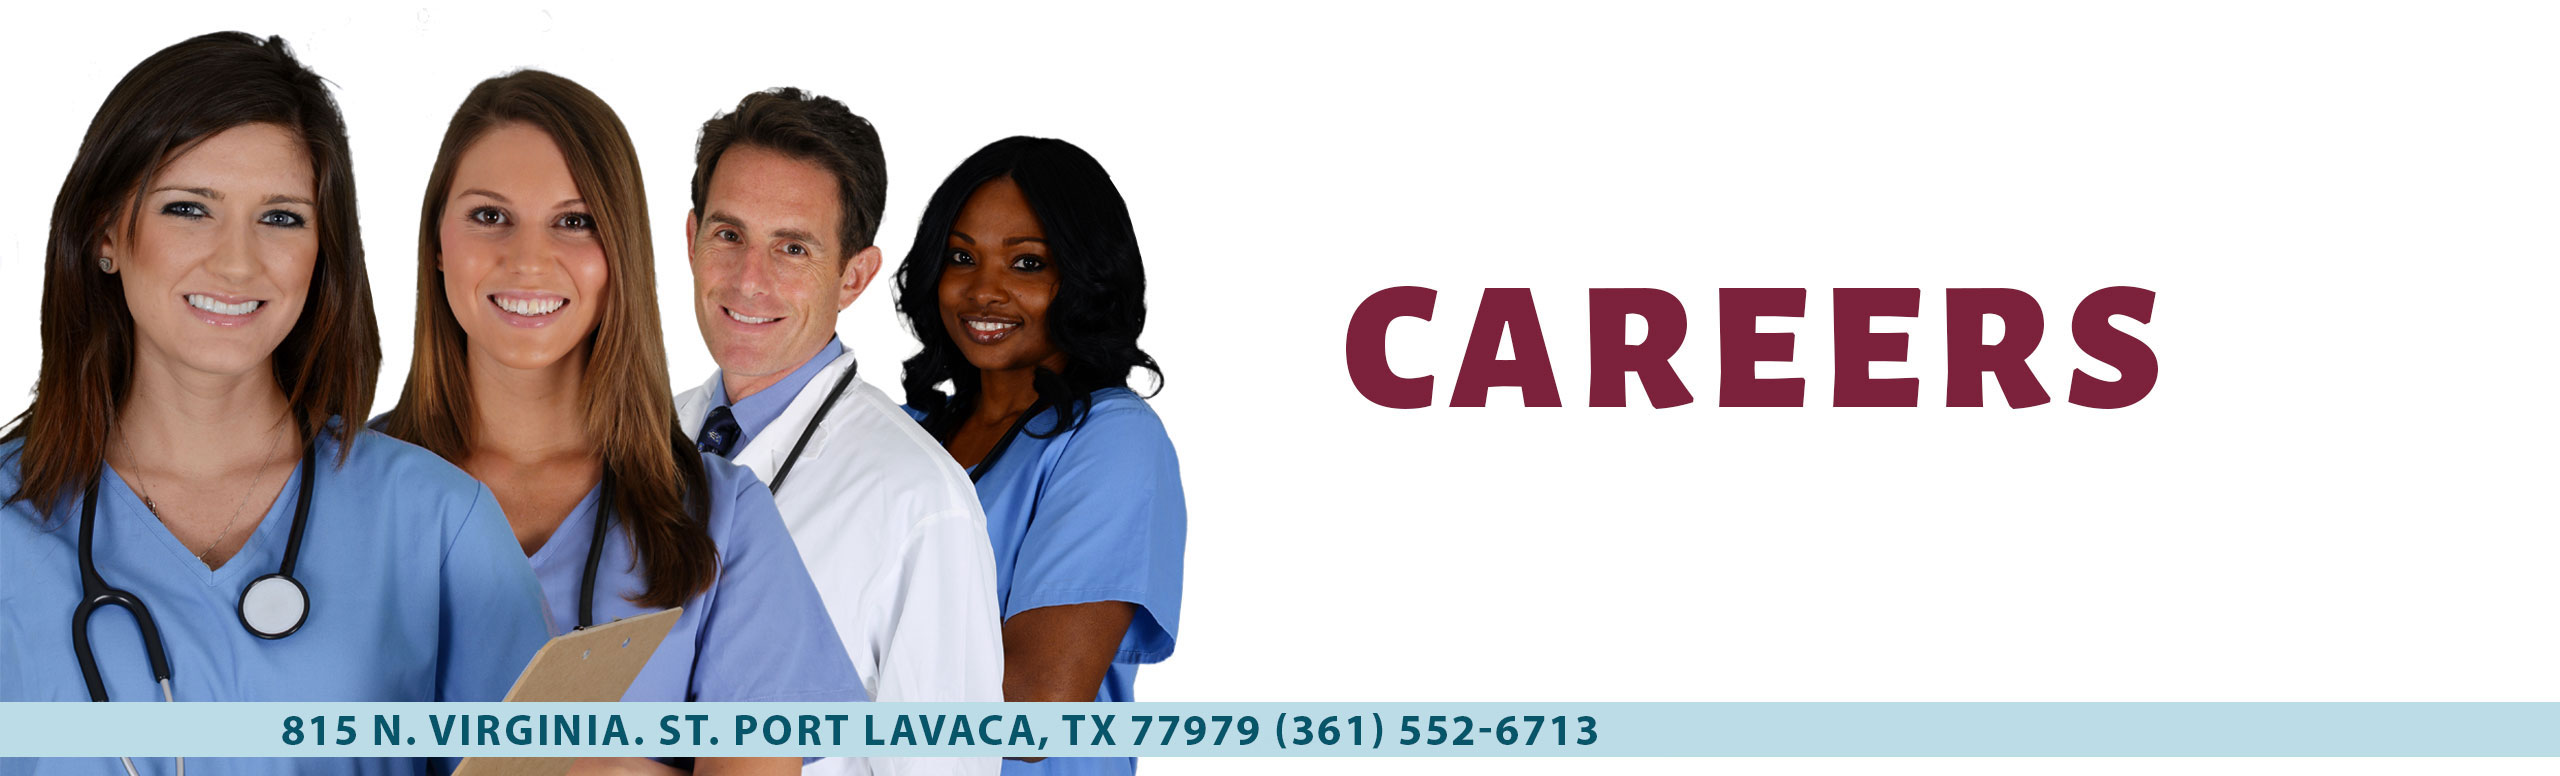 Banner picture of a male Physician and 3 female Nurses
Careers

1016 N, VIRGINIA ST. PORT LAVACA, TX 77979 (361) 552